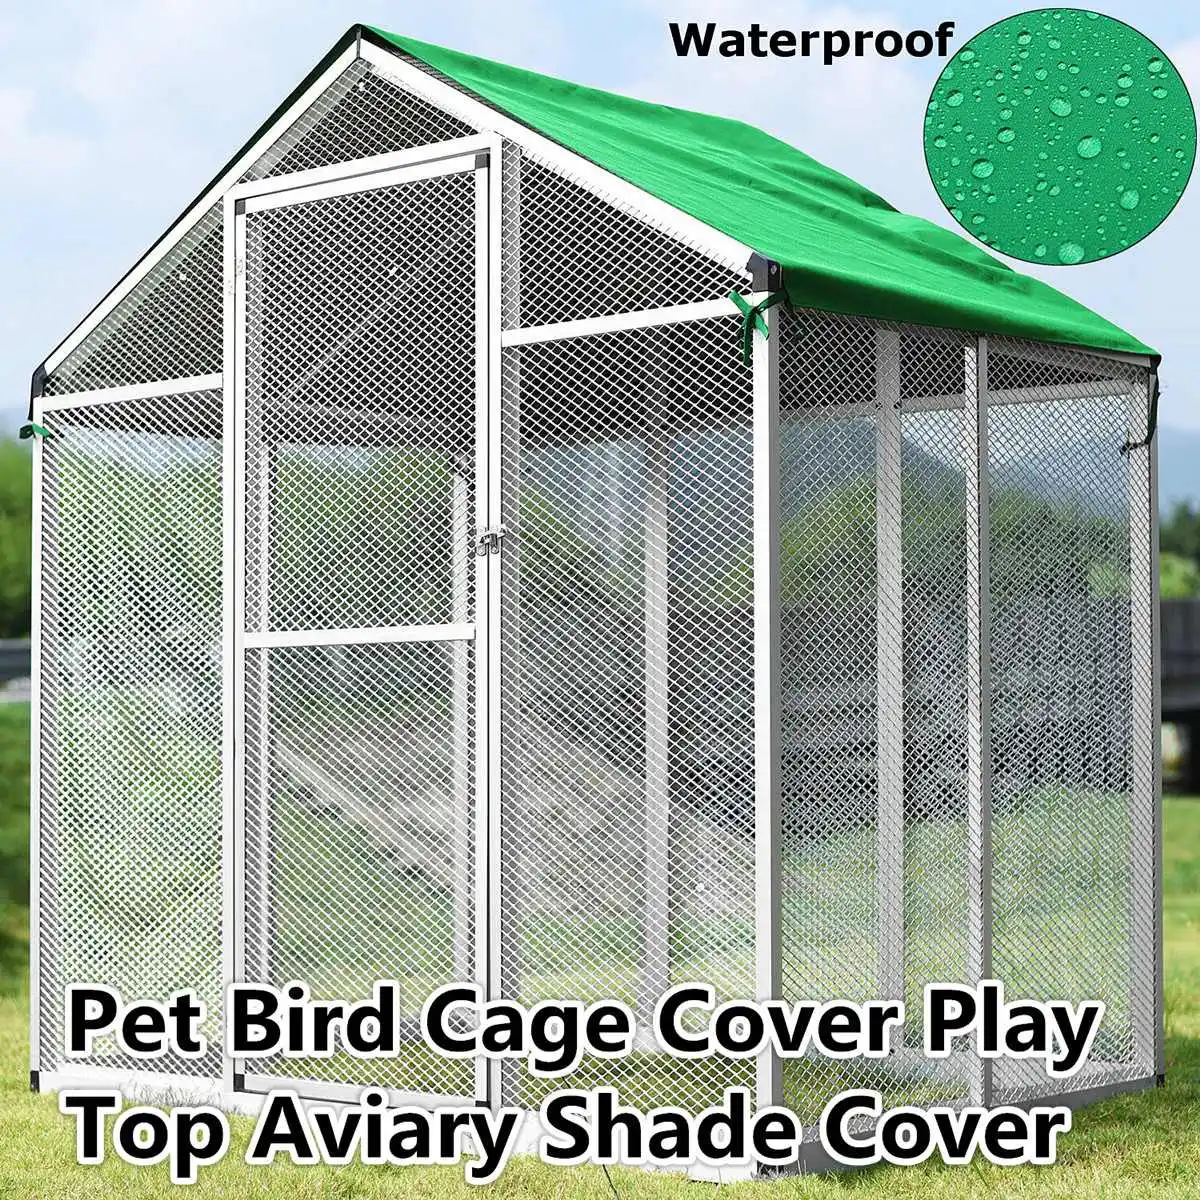 Parrots Aviary Birds Cage Cover Seed Catcher Guard Bag Waterproof Lightweight Protection Bird Parrot Cage Top Cover